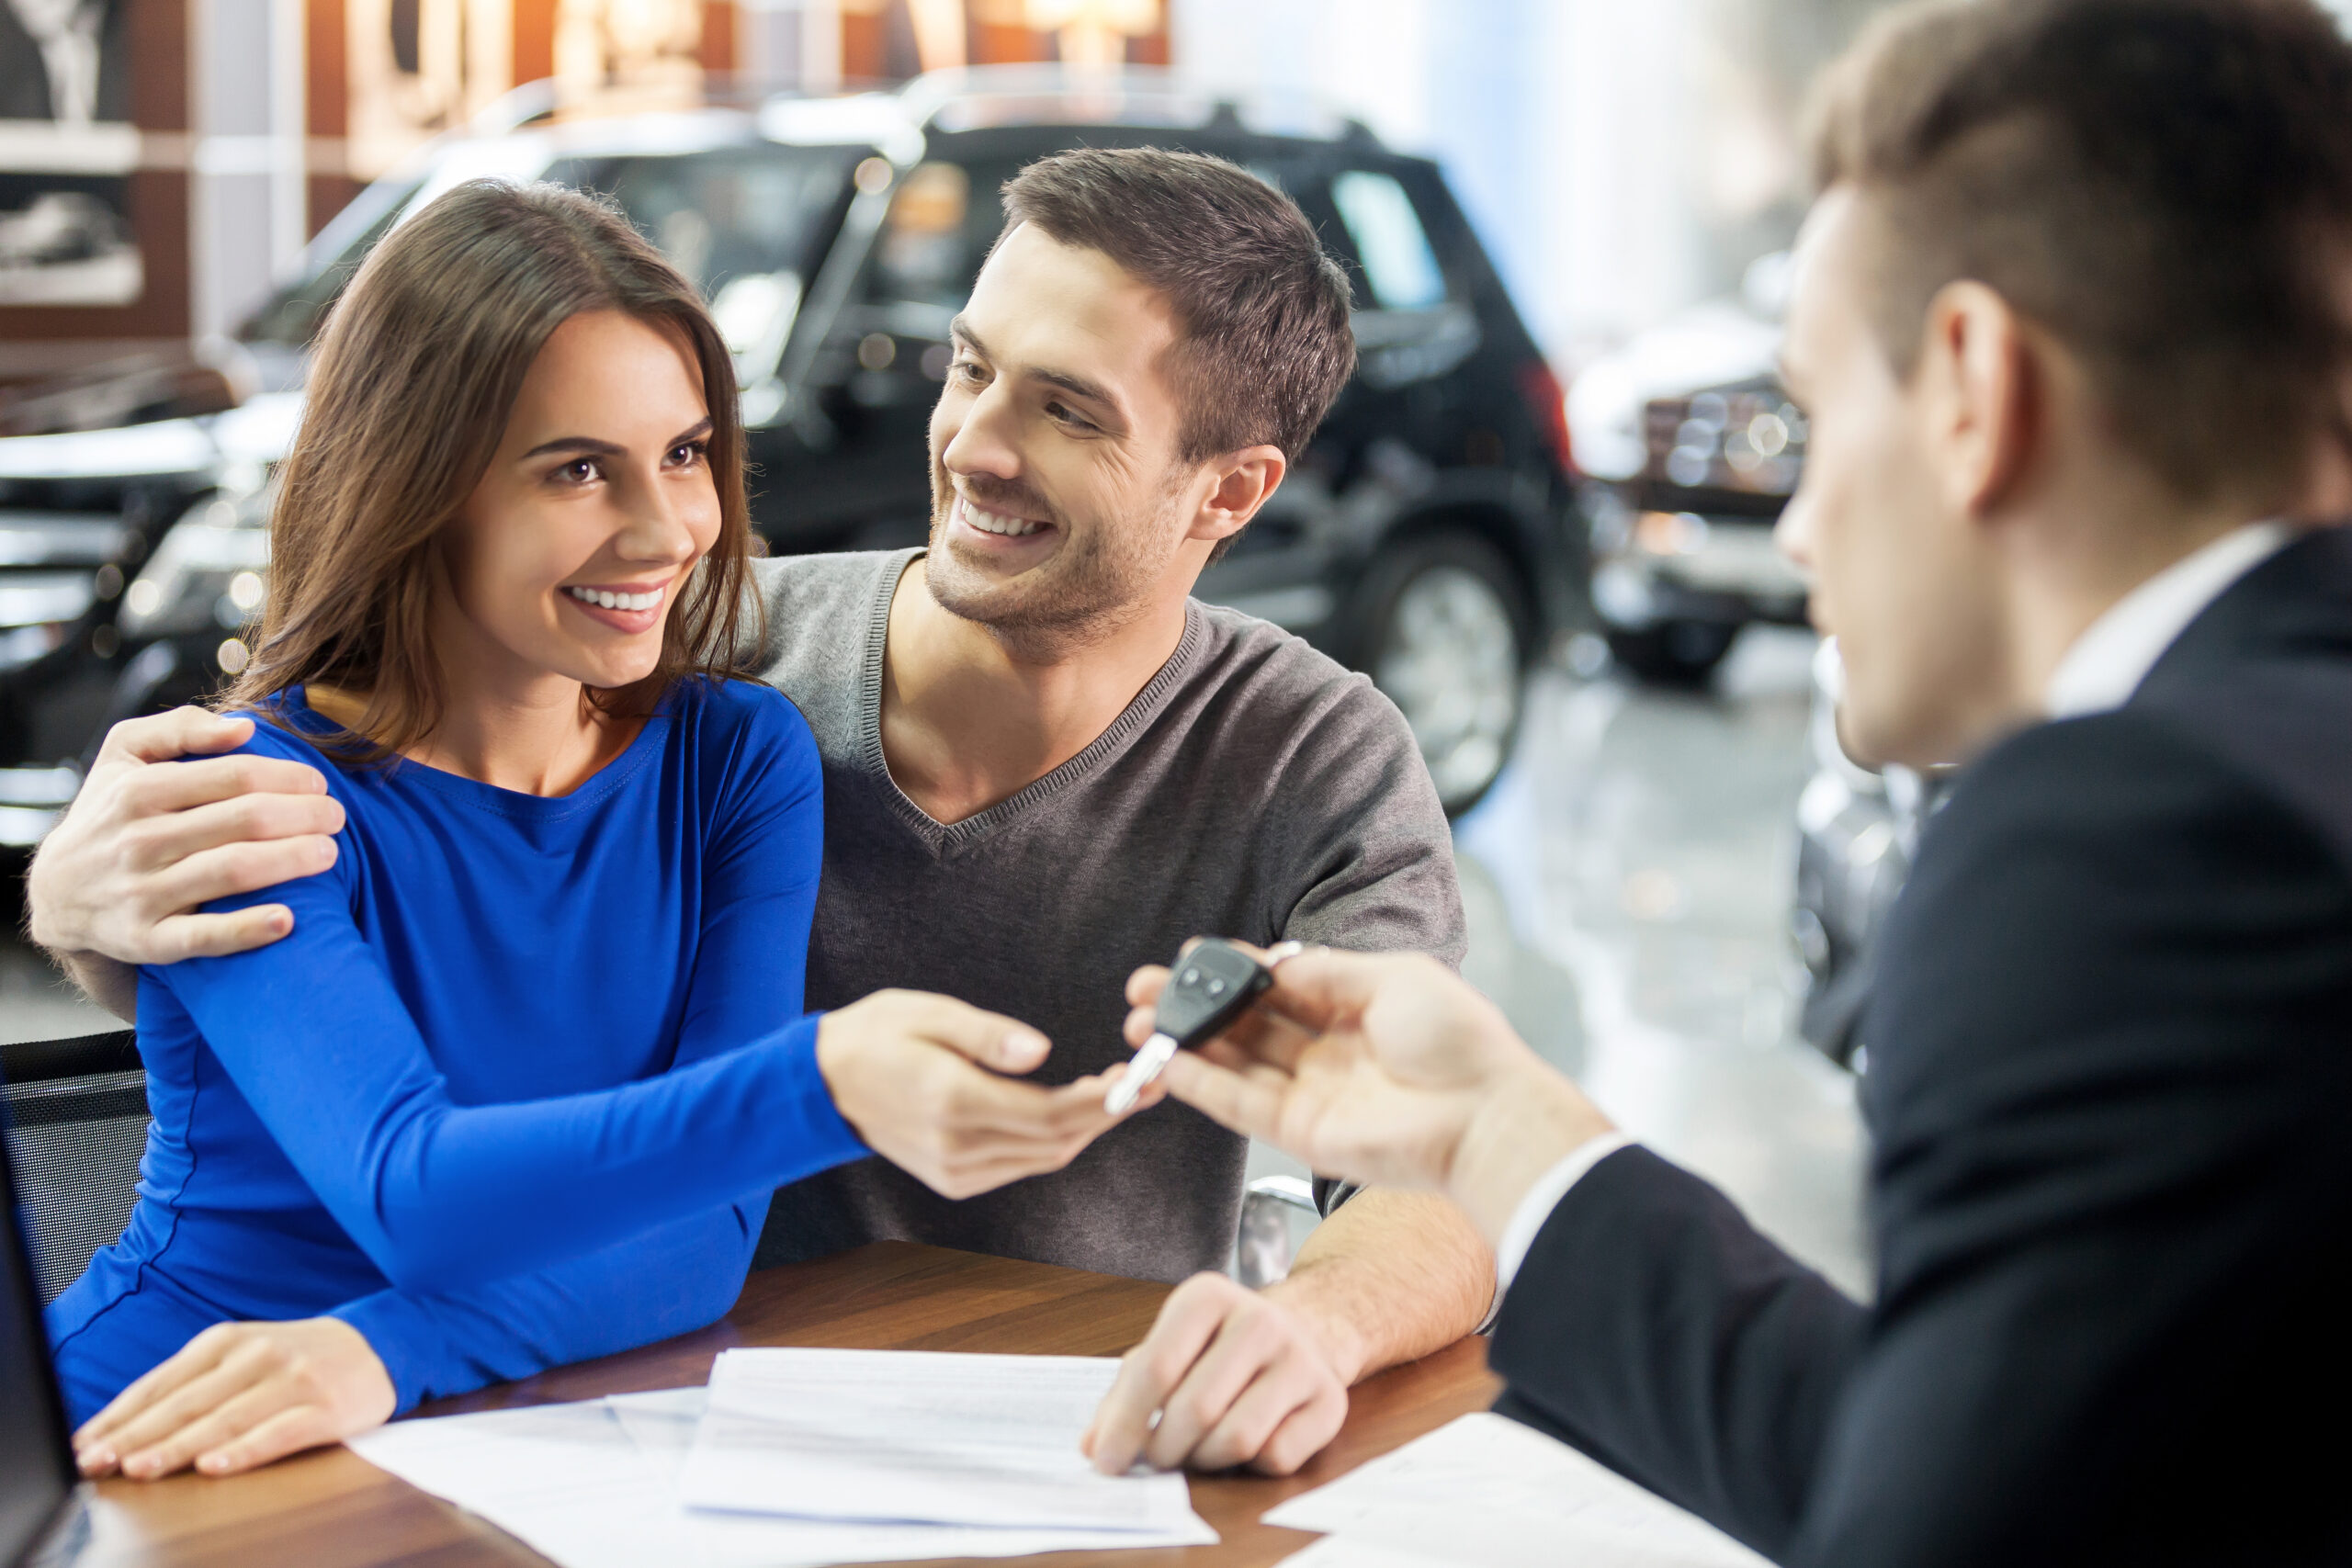 Types of Vehicle Service Contracts